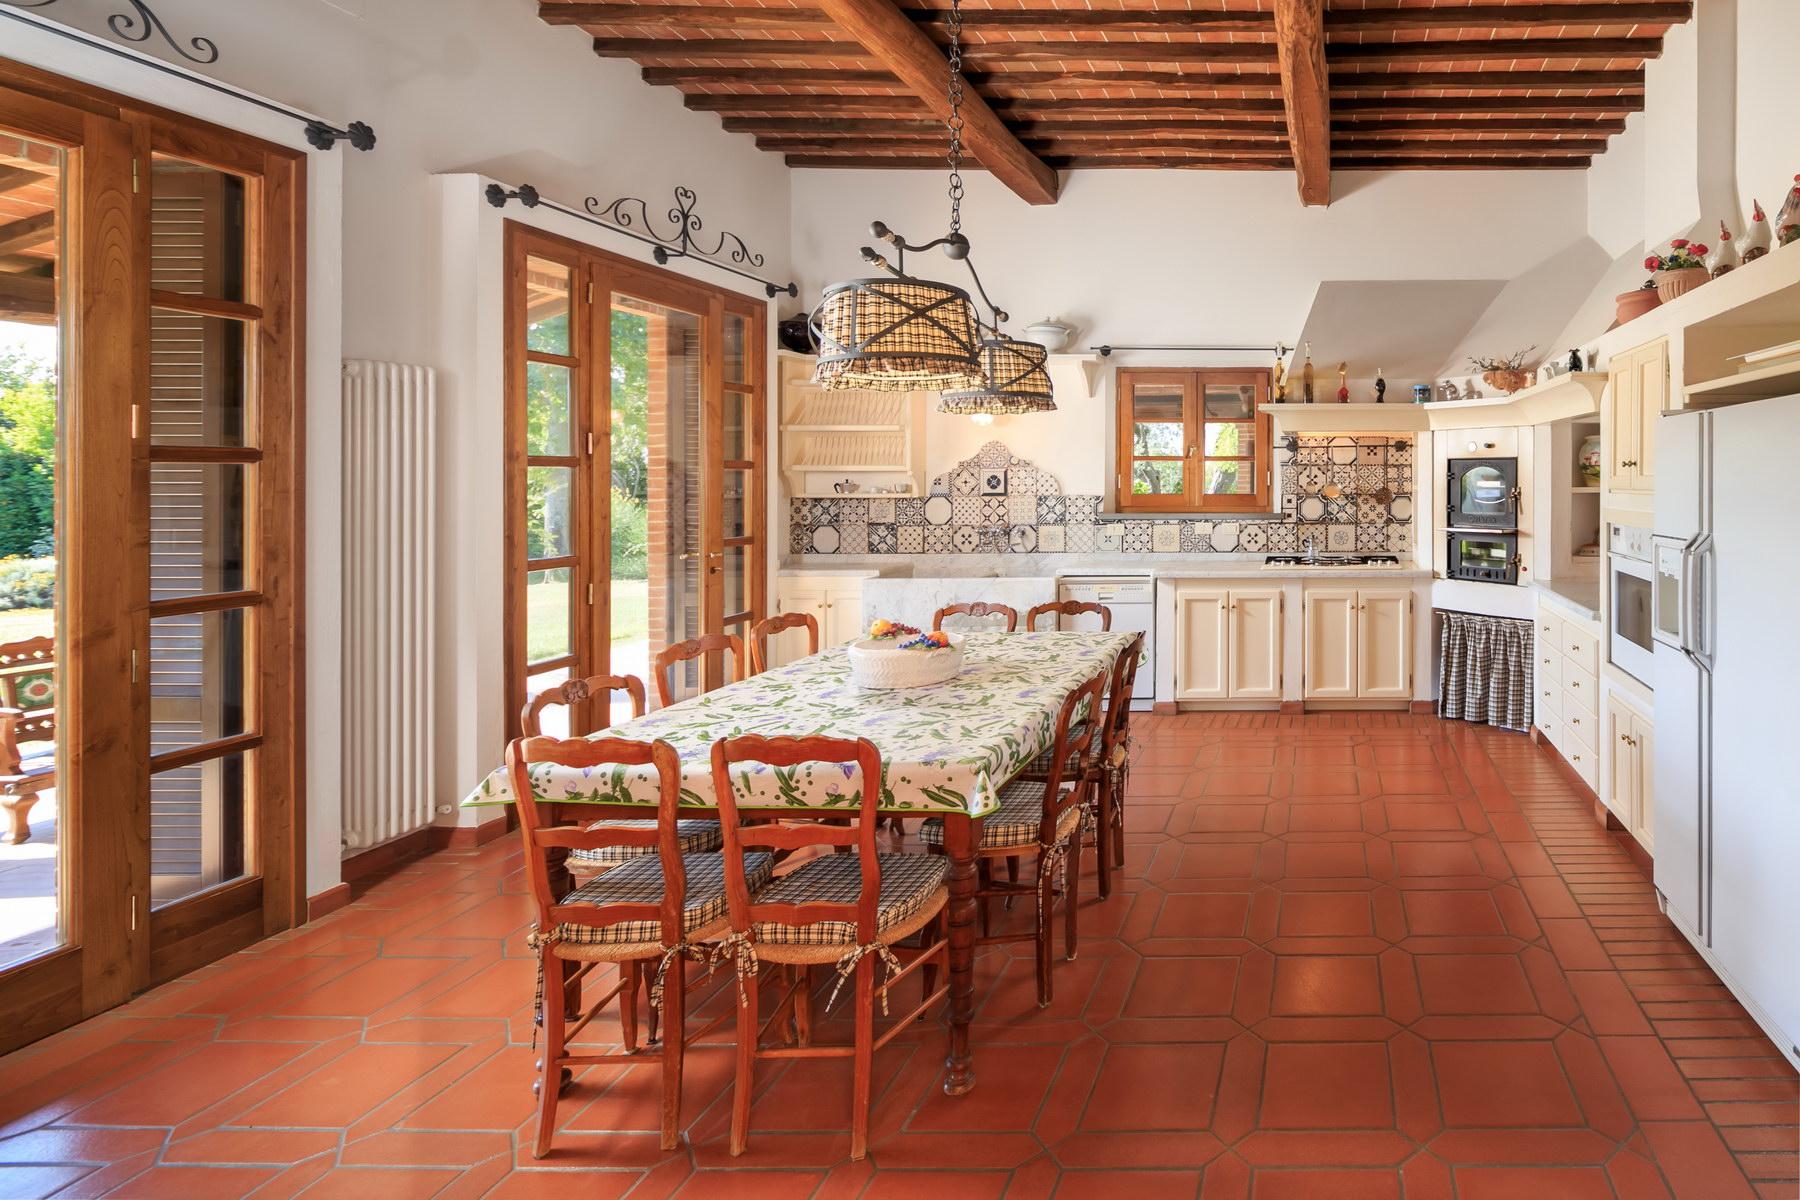 Wonderful villa with spectacular views of montepulciano - 13